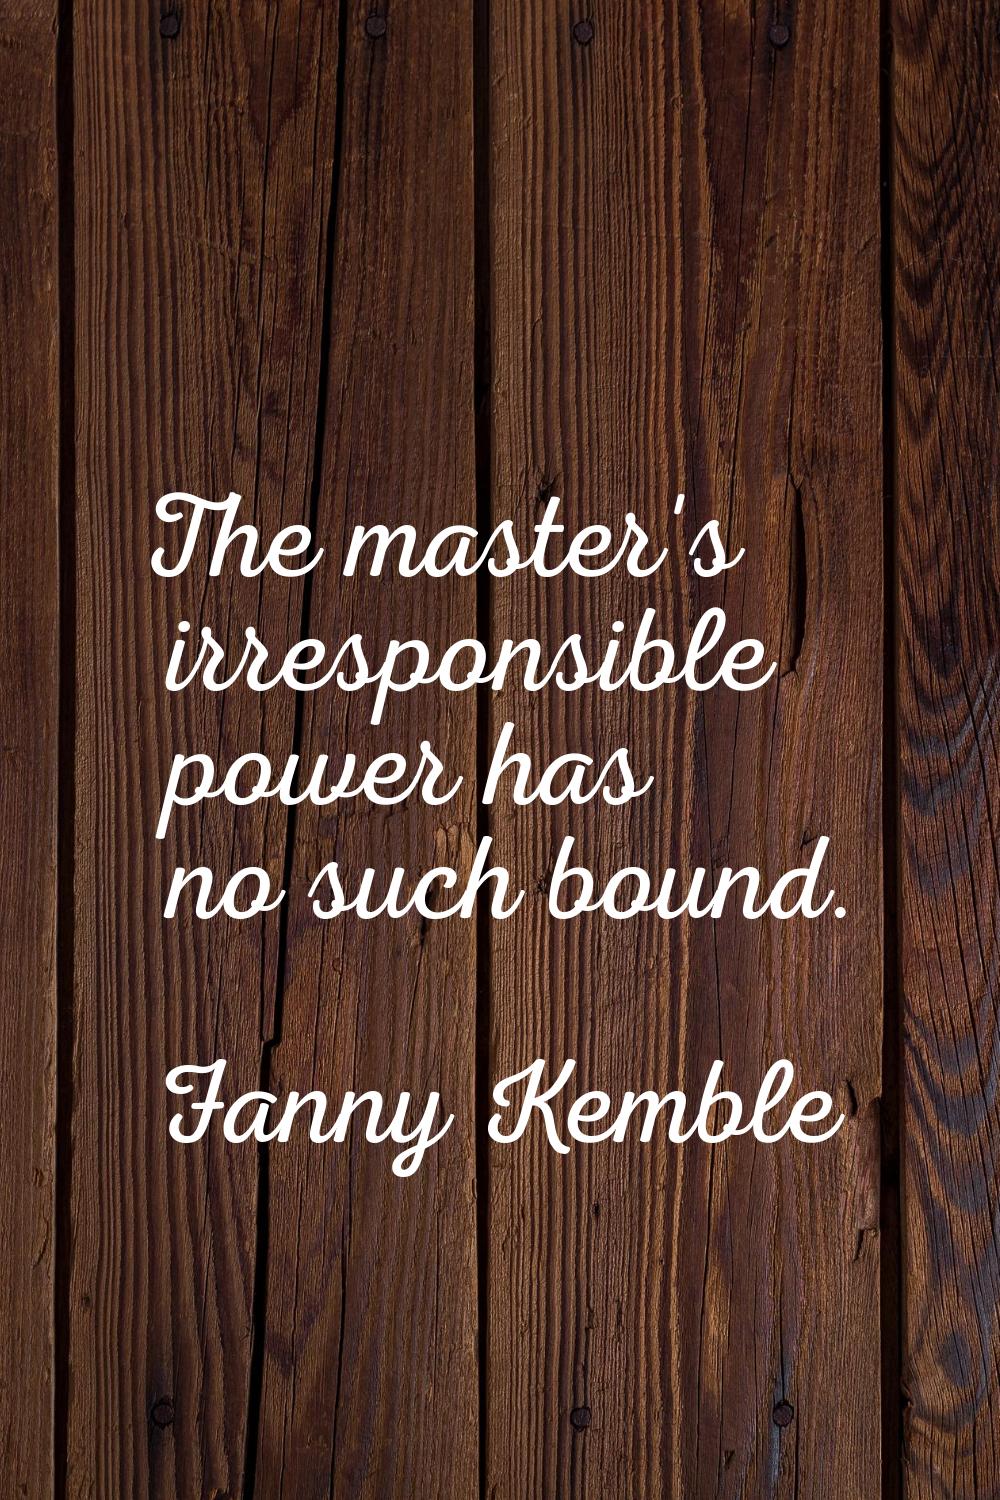 The master's irresponsible power has no such bound.